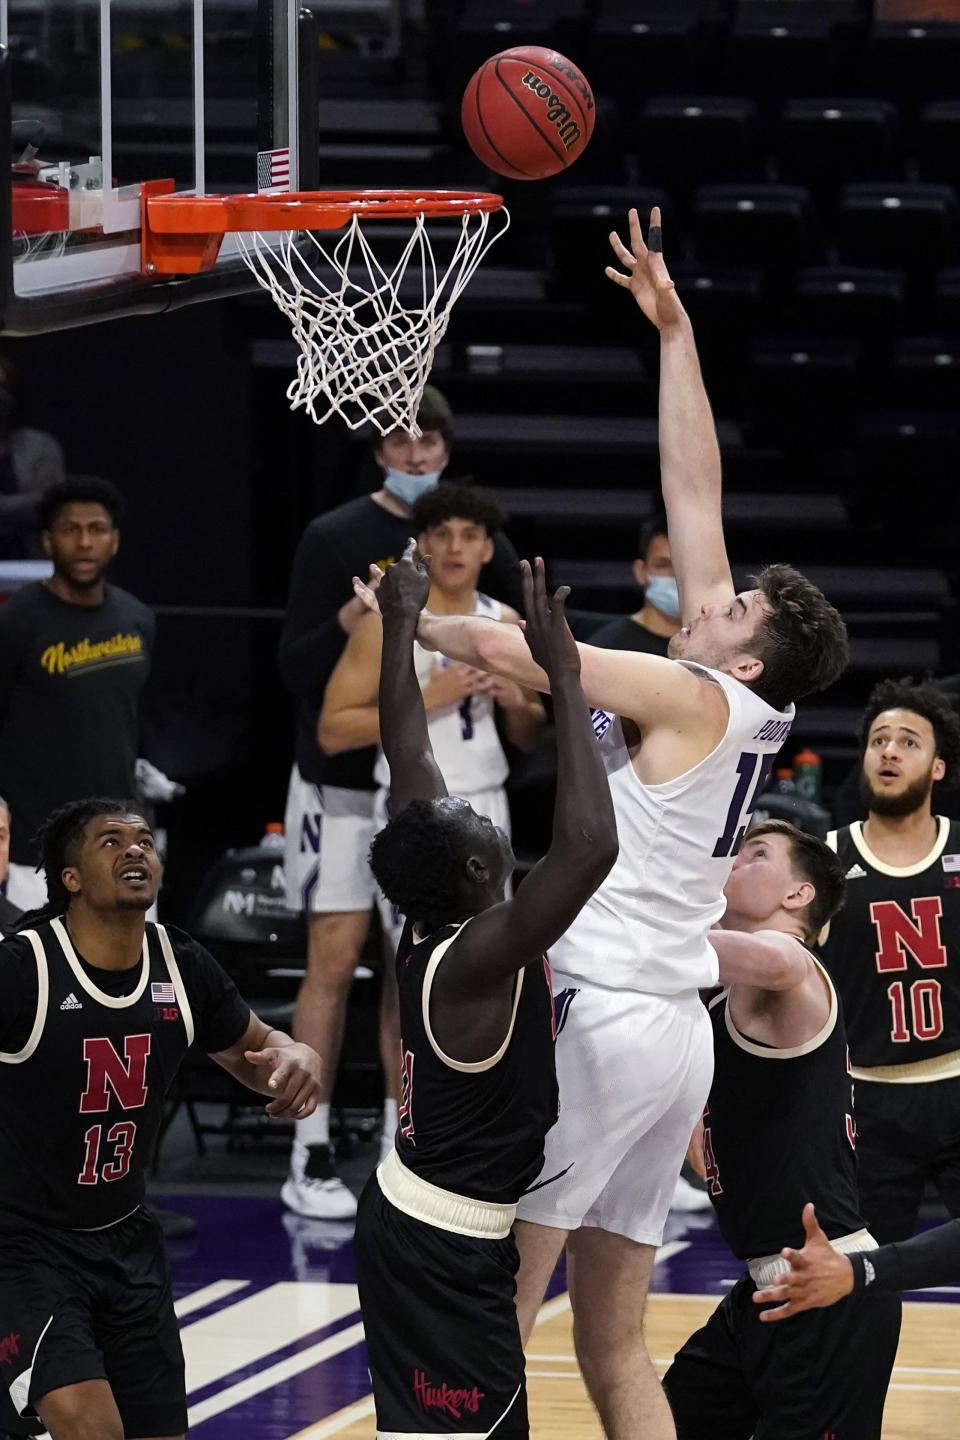 Northwestern center Ryan Young, center, shoots against Nebraska forward Lat Mayen and guard Thorir Thorbjarnarson during the second half of an NCAA college basketball game in Evanston, Ill., Sunday, March 7, 2021. (AP Photo/Nam Y. Huh)